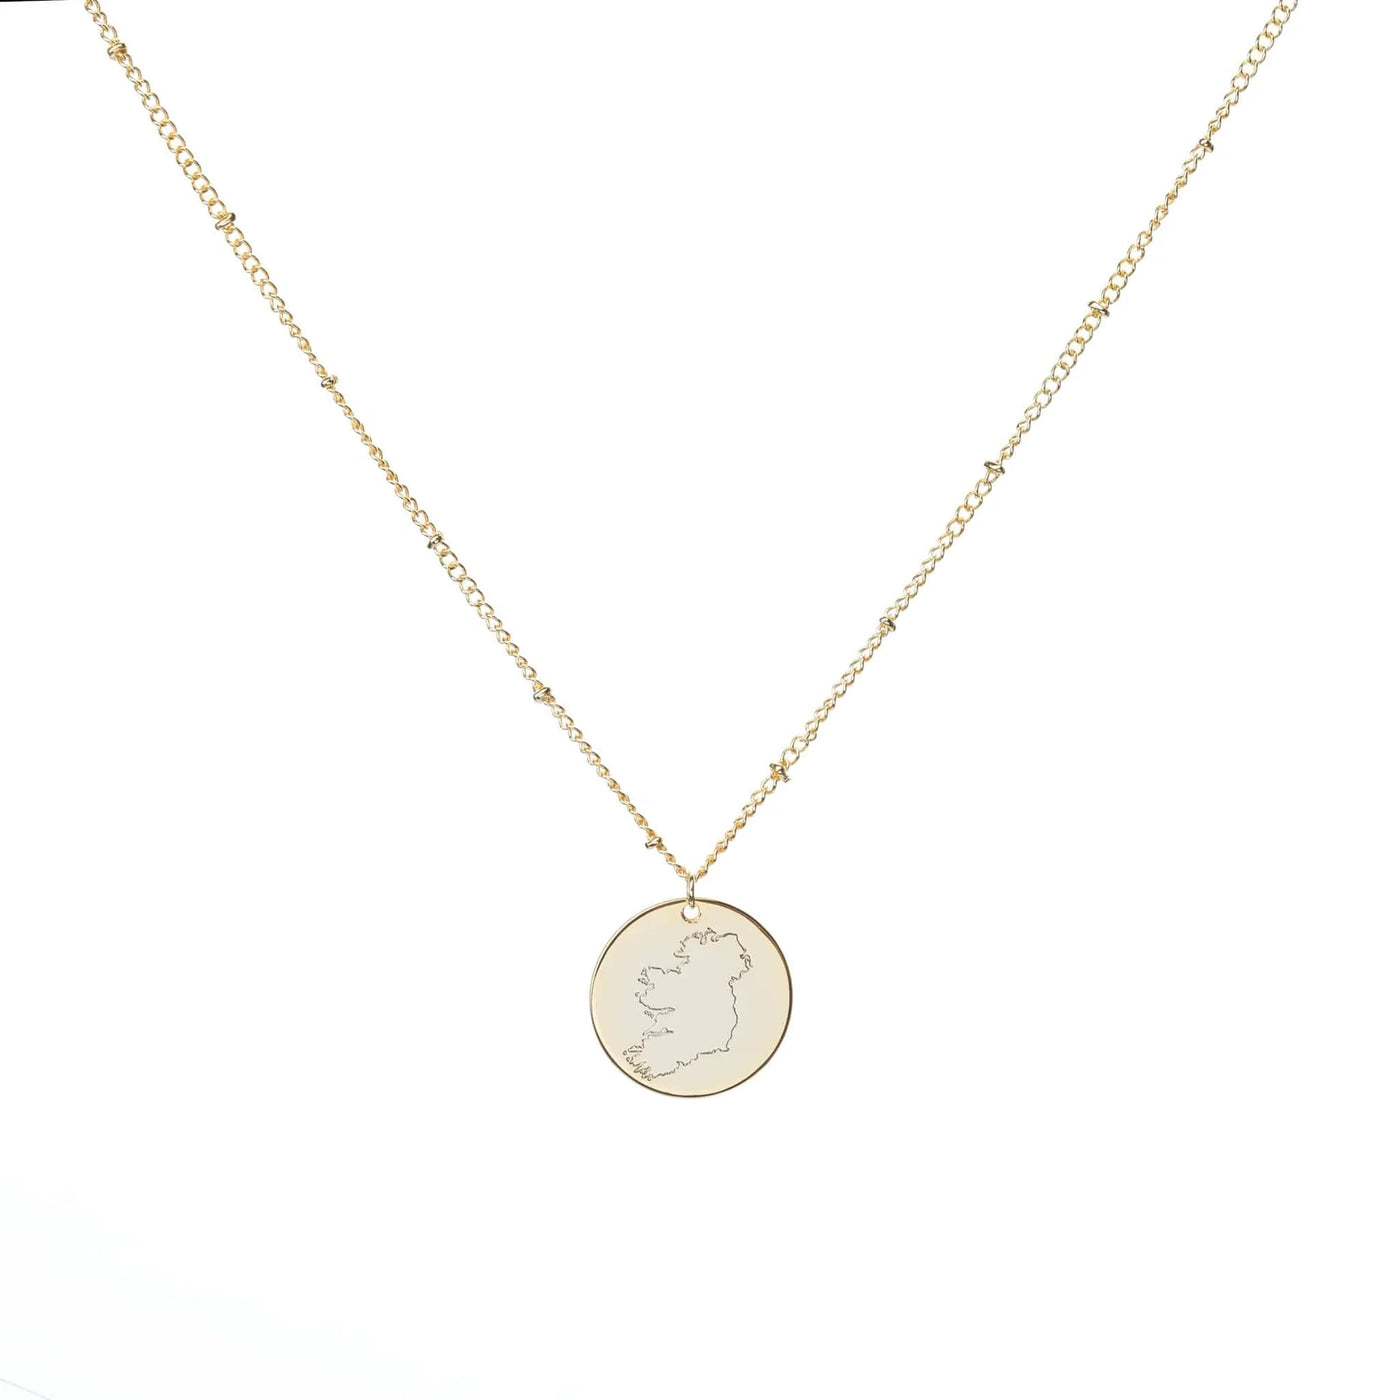 Shadow Map of Ireland Disc Necklace